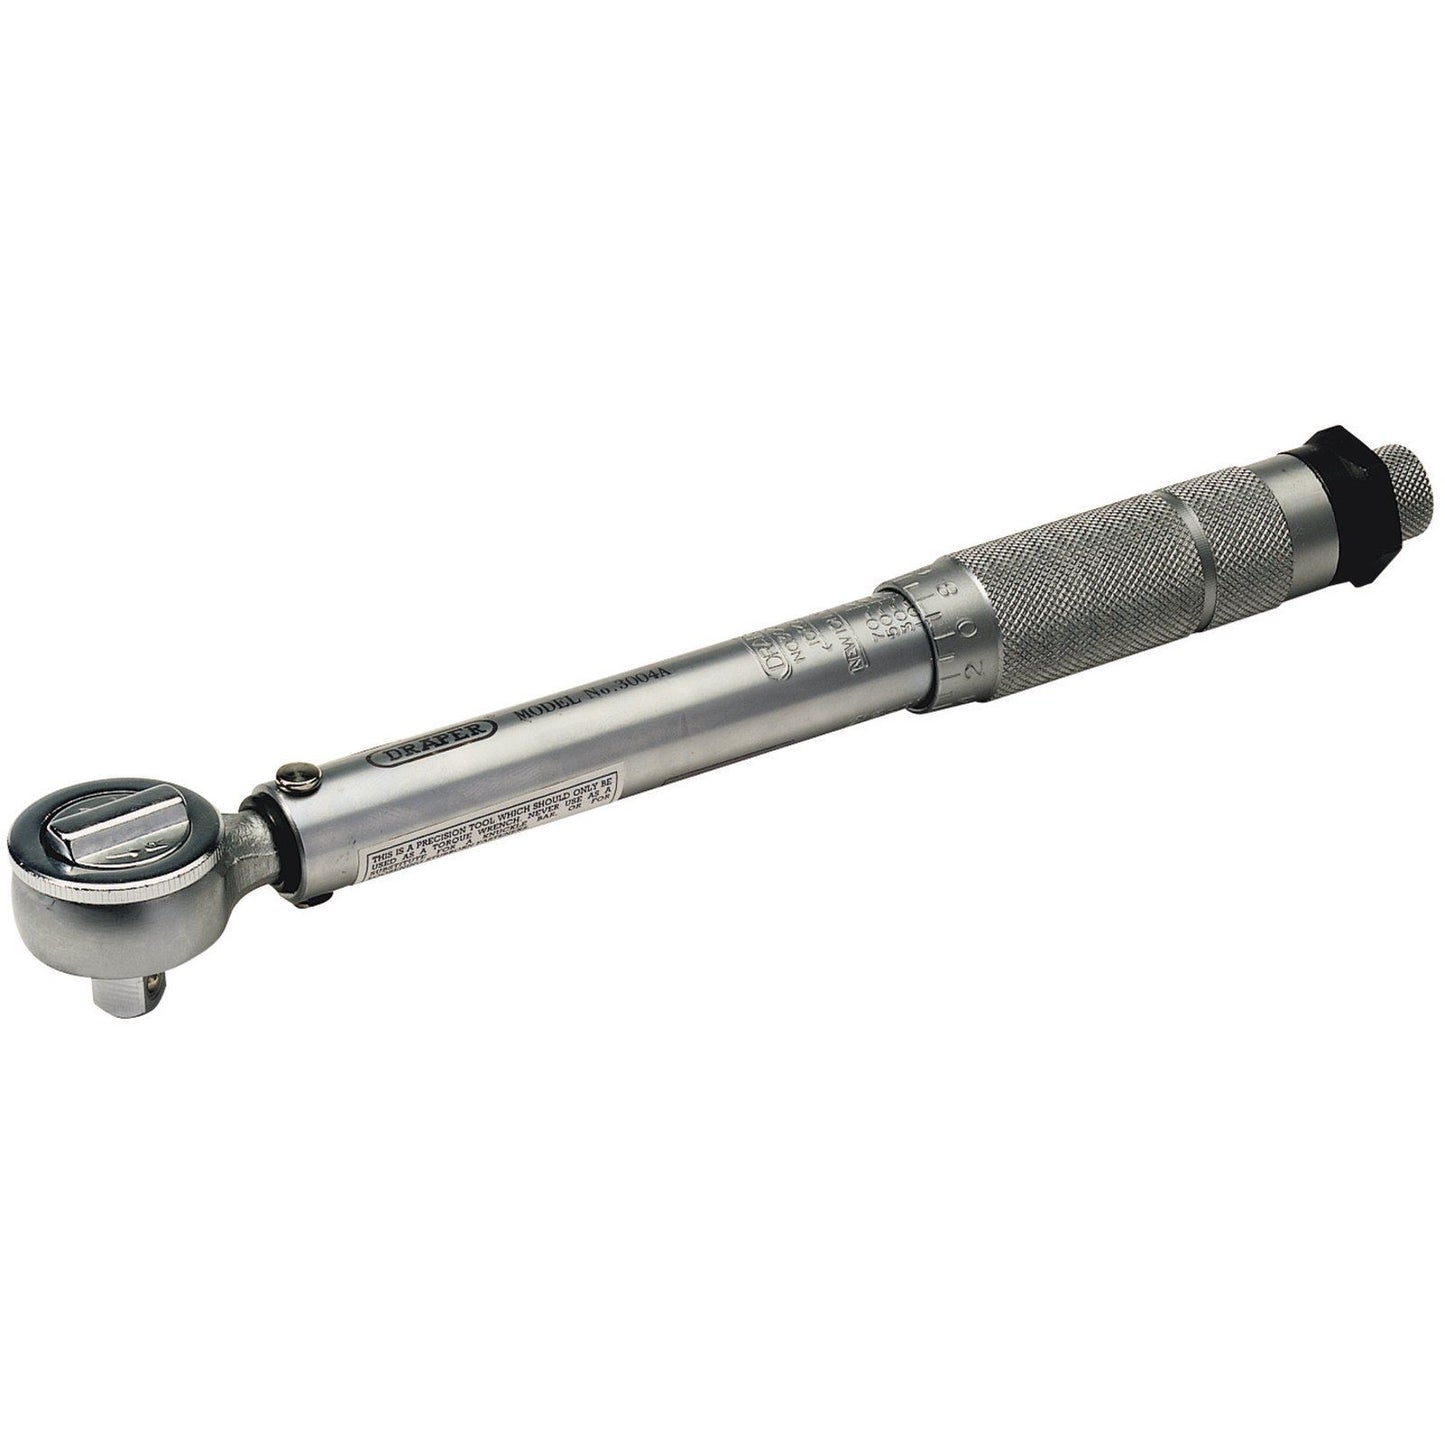 Draper 3/8" Square Drive 10 - 80Nm or 88.5 - 708In-lb Ratchet Torque Wrench (Sol - 54627